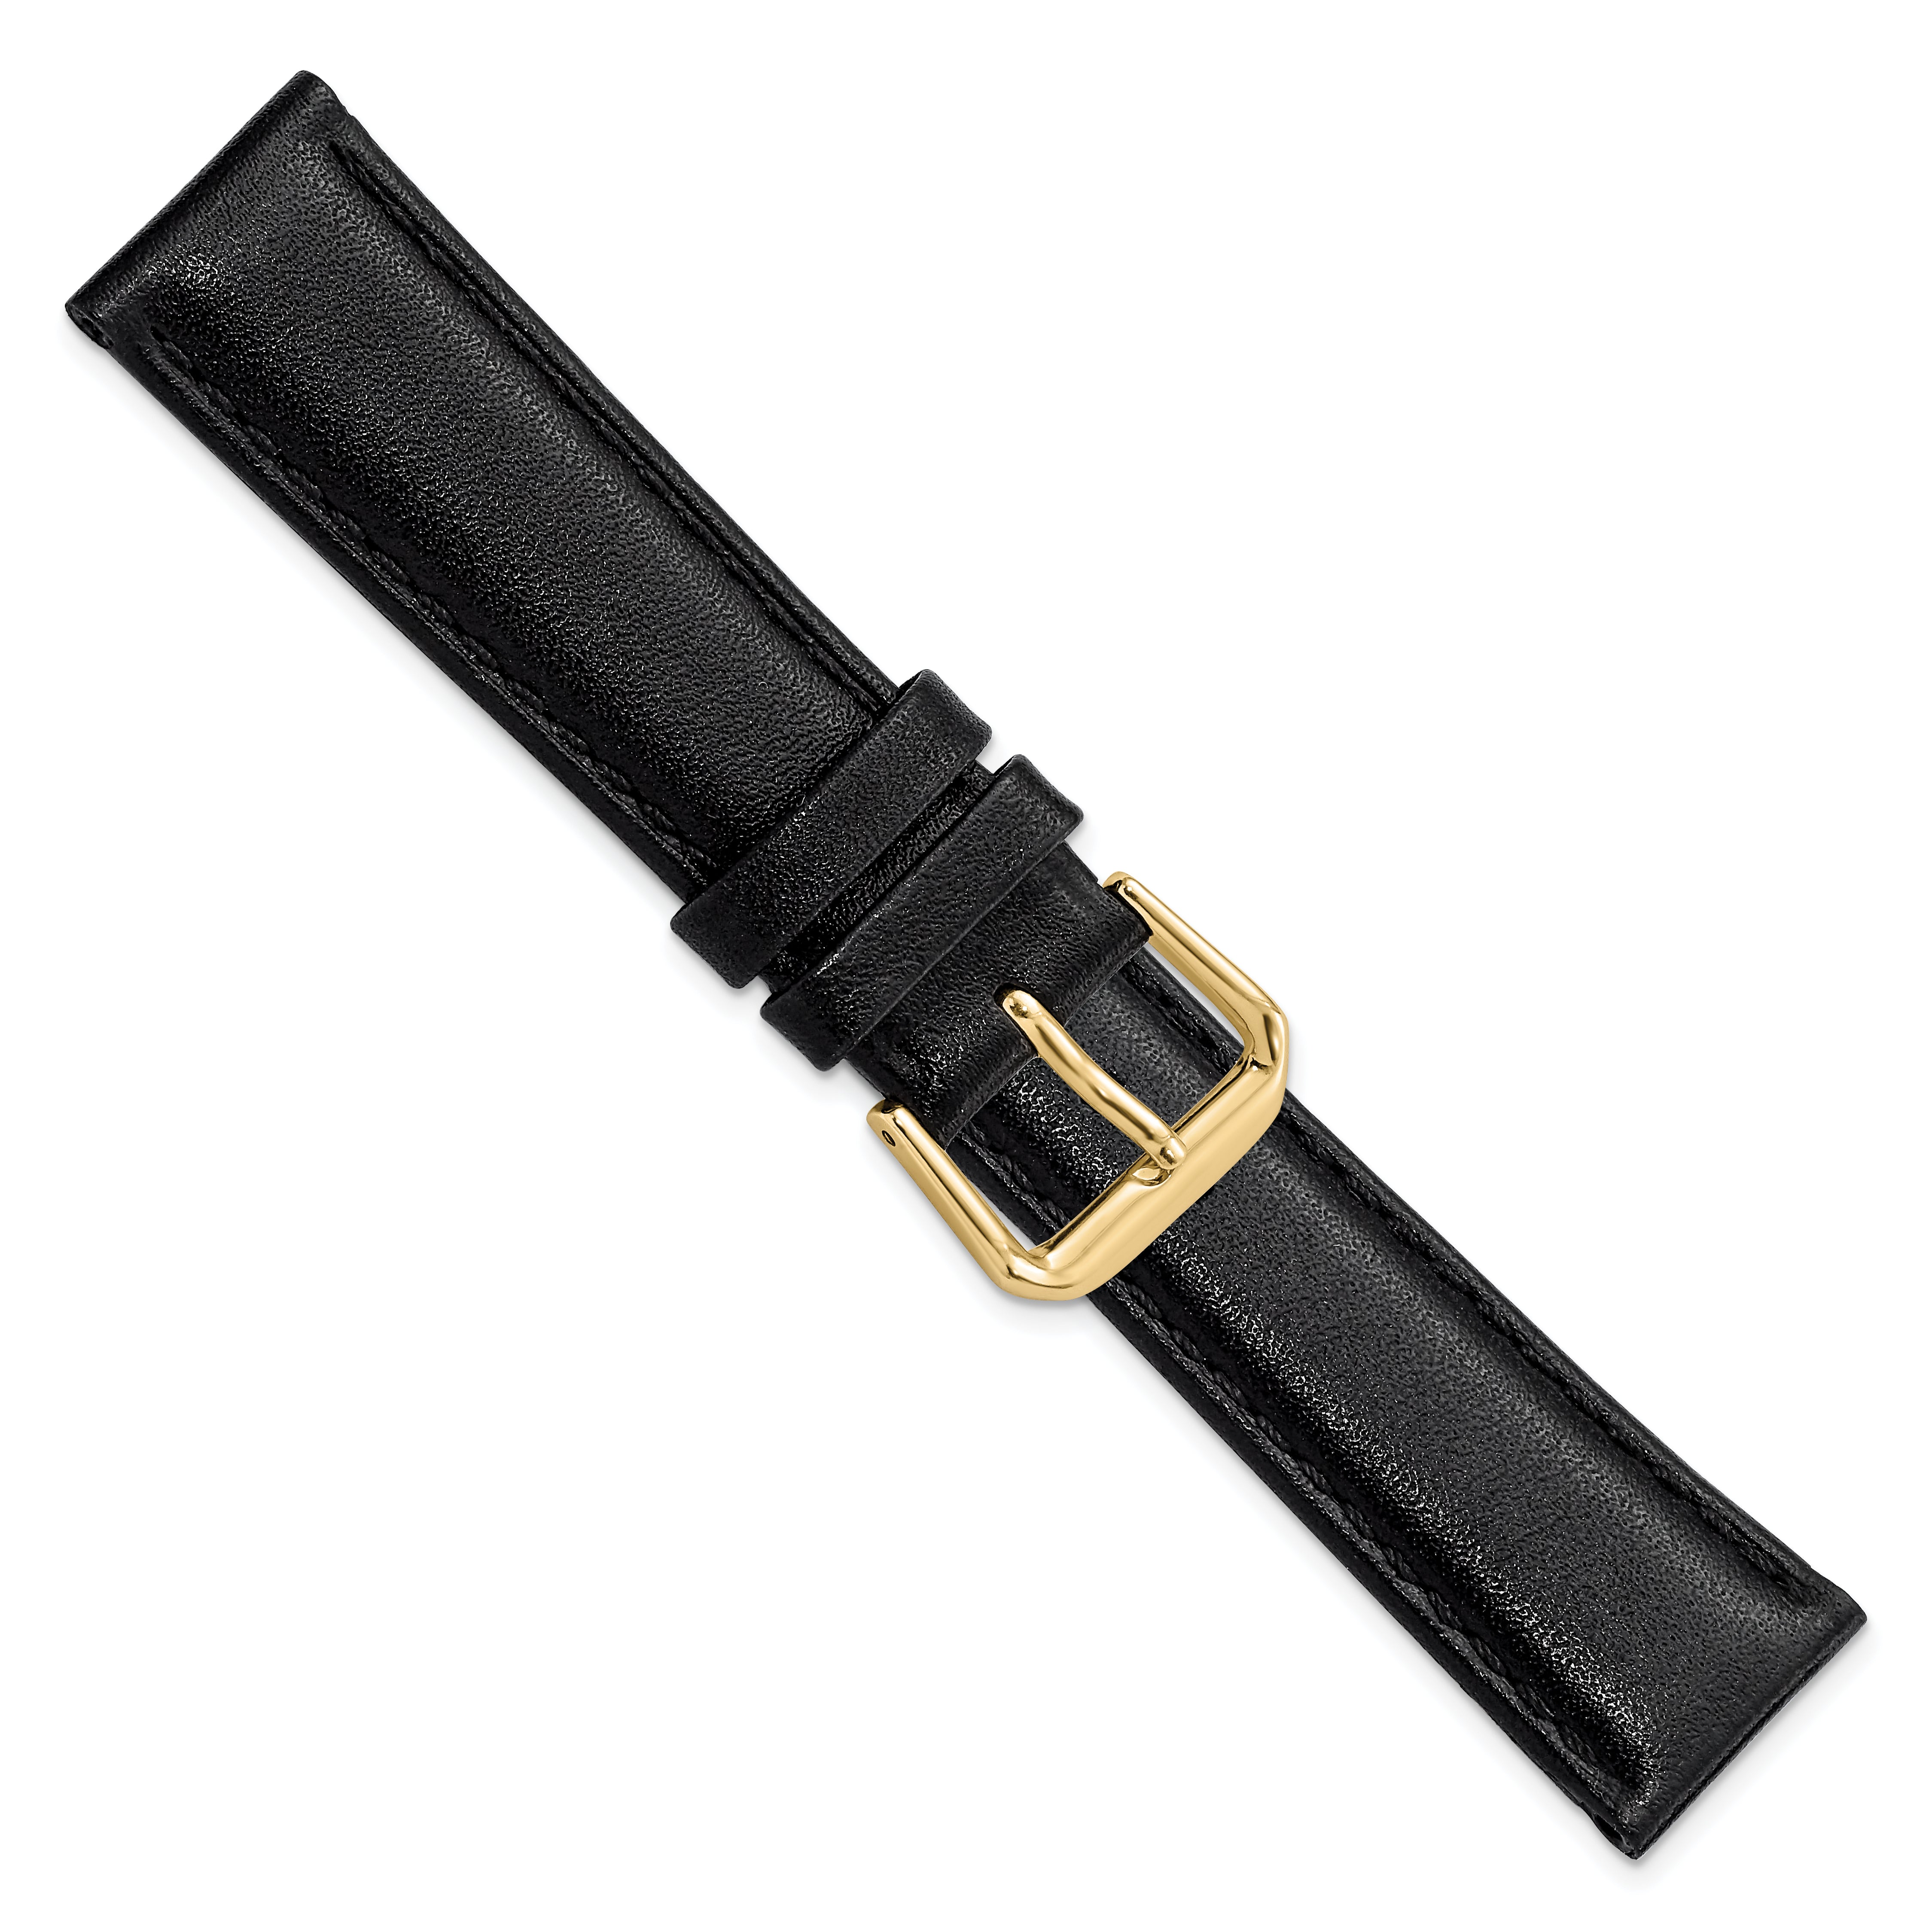 12mm Short Black Smooth Leather with Gold-tone Buckle 6.25 inch Watch Band